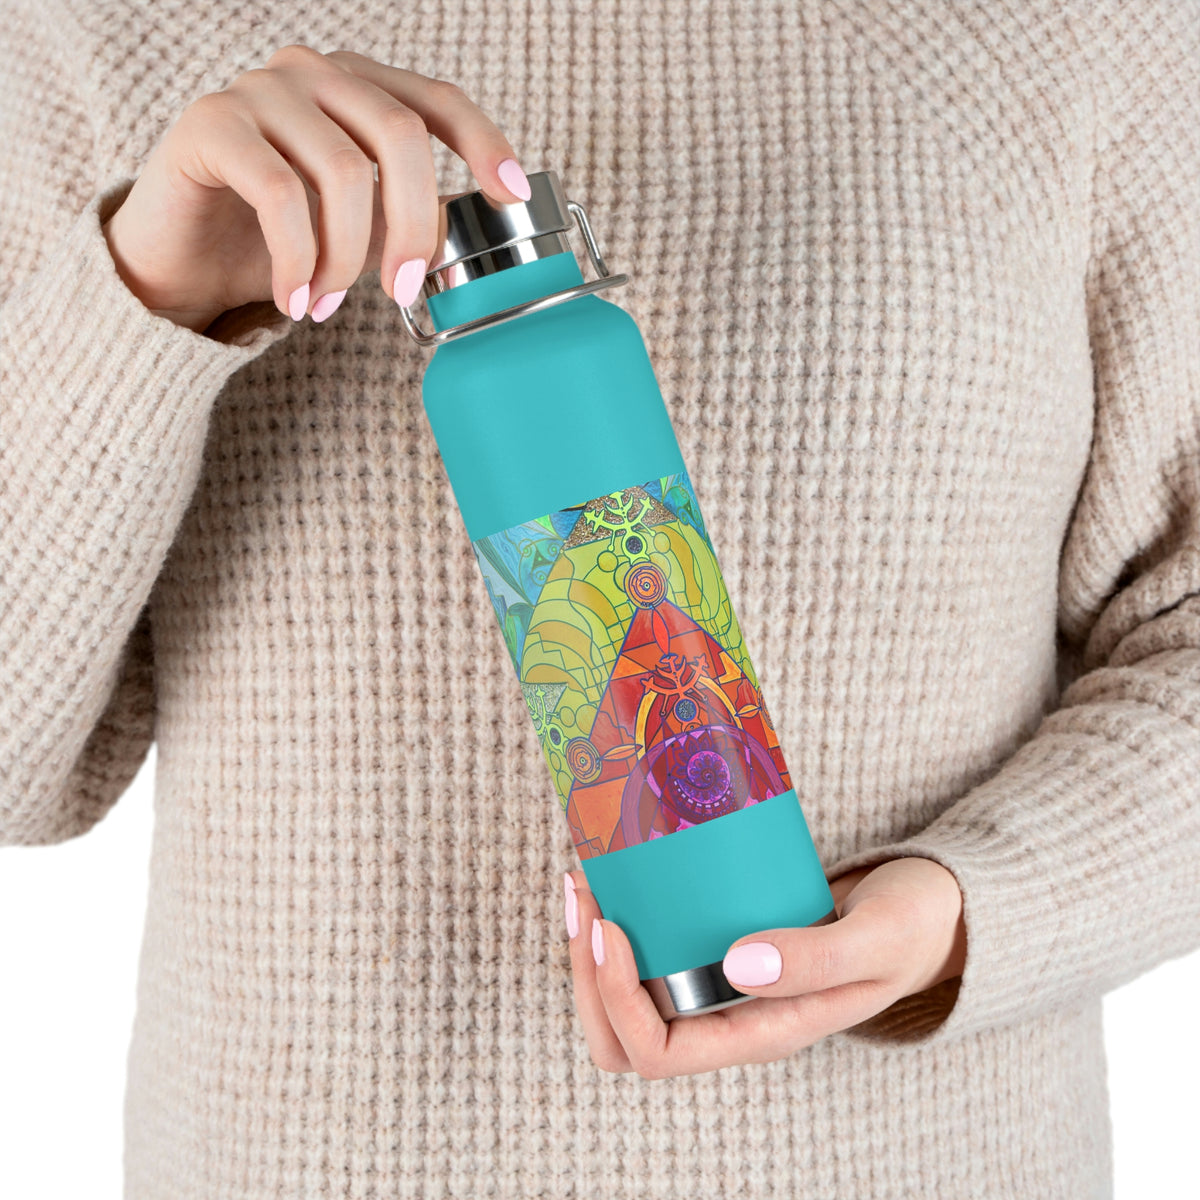 Expansion Pleiadian Light Work Model - Copper Vacuum Insulated Bottle, 22oz